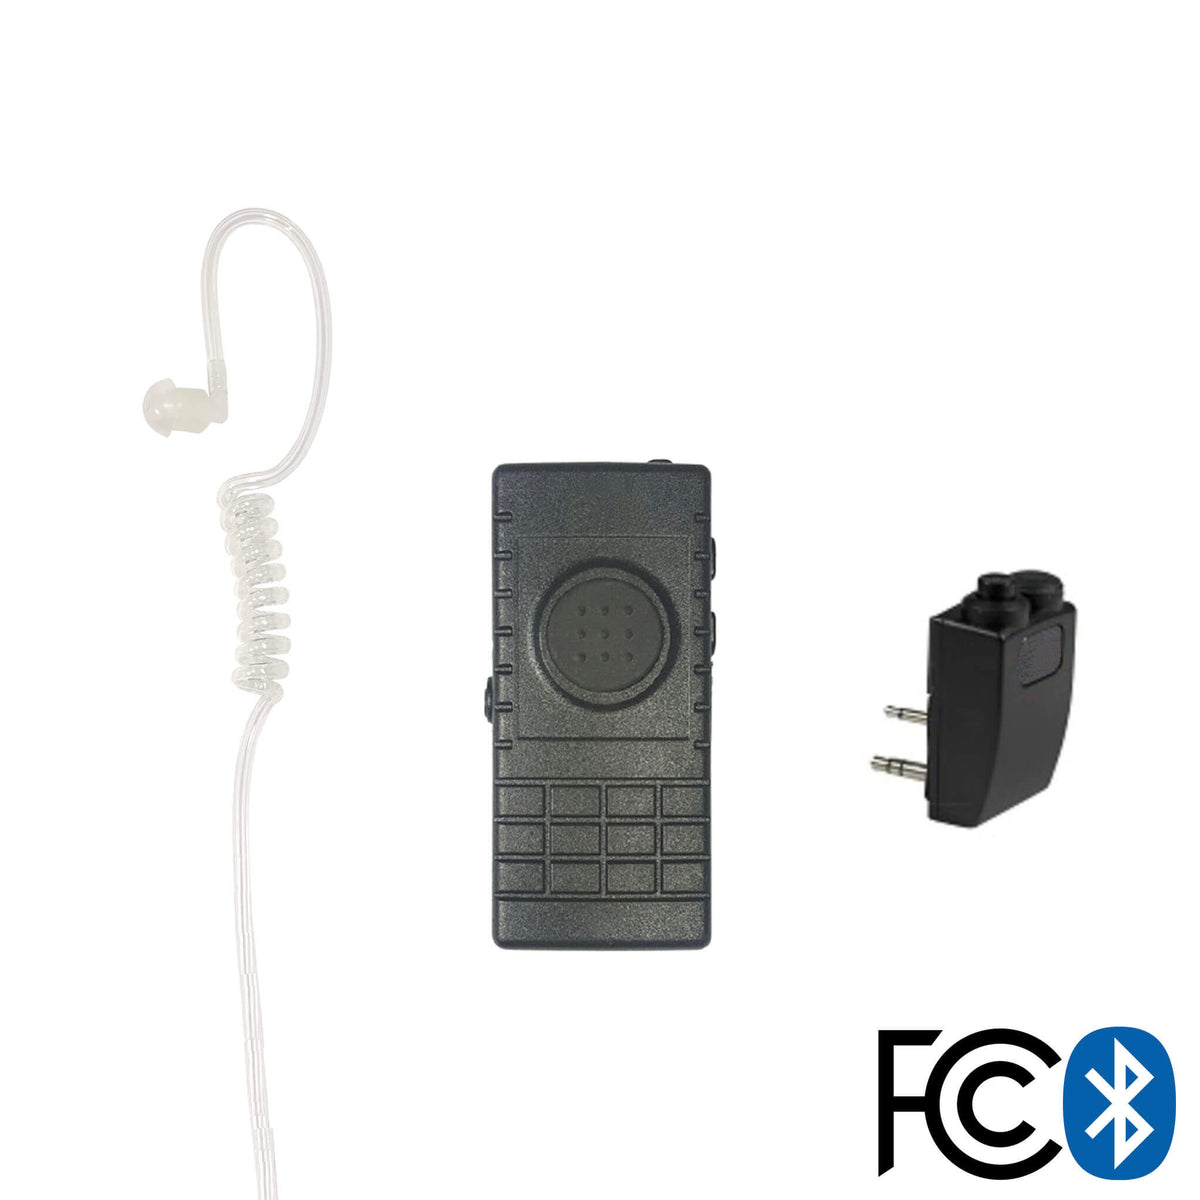 Bluetooth Lapel/Utility Mic  Earpiece Kit w/ Adapter For Kenwood: ONLY  NX-220/240/320/340/420 and TK-2170/2173/2312/2360/2402/3170/3360/3402